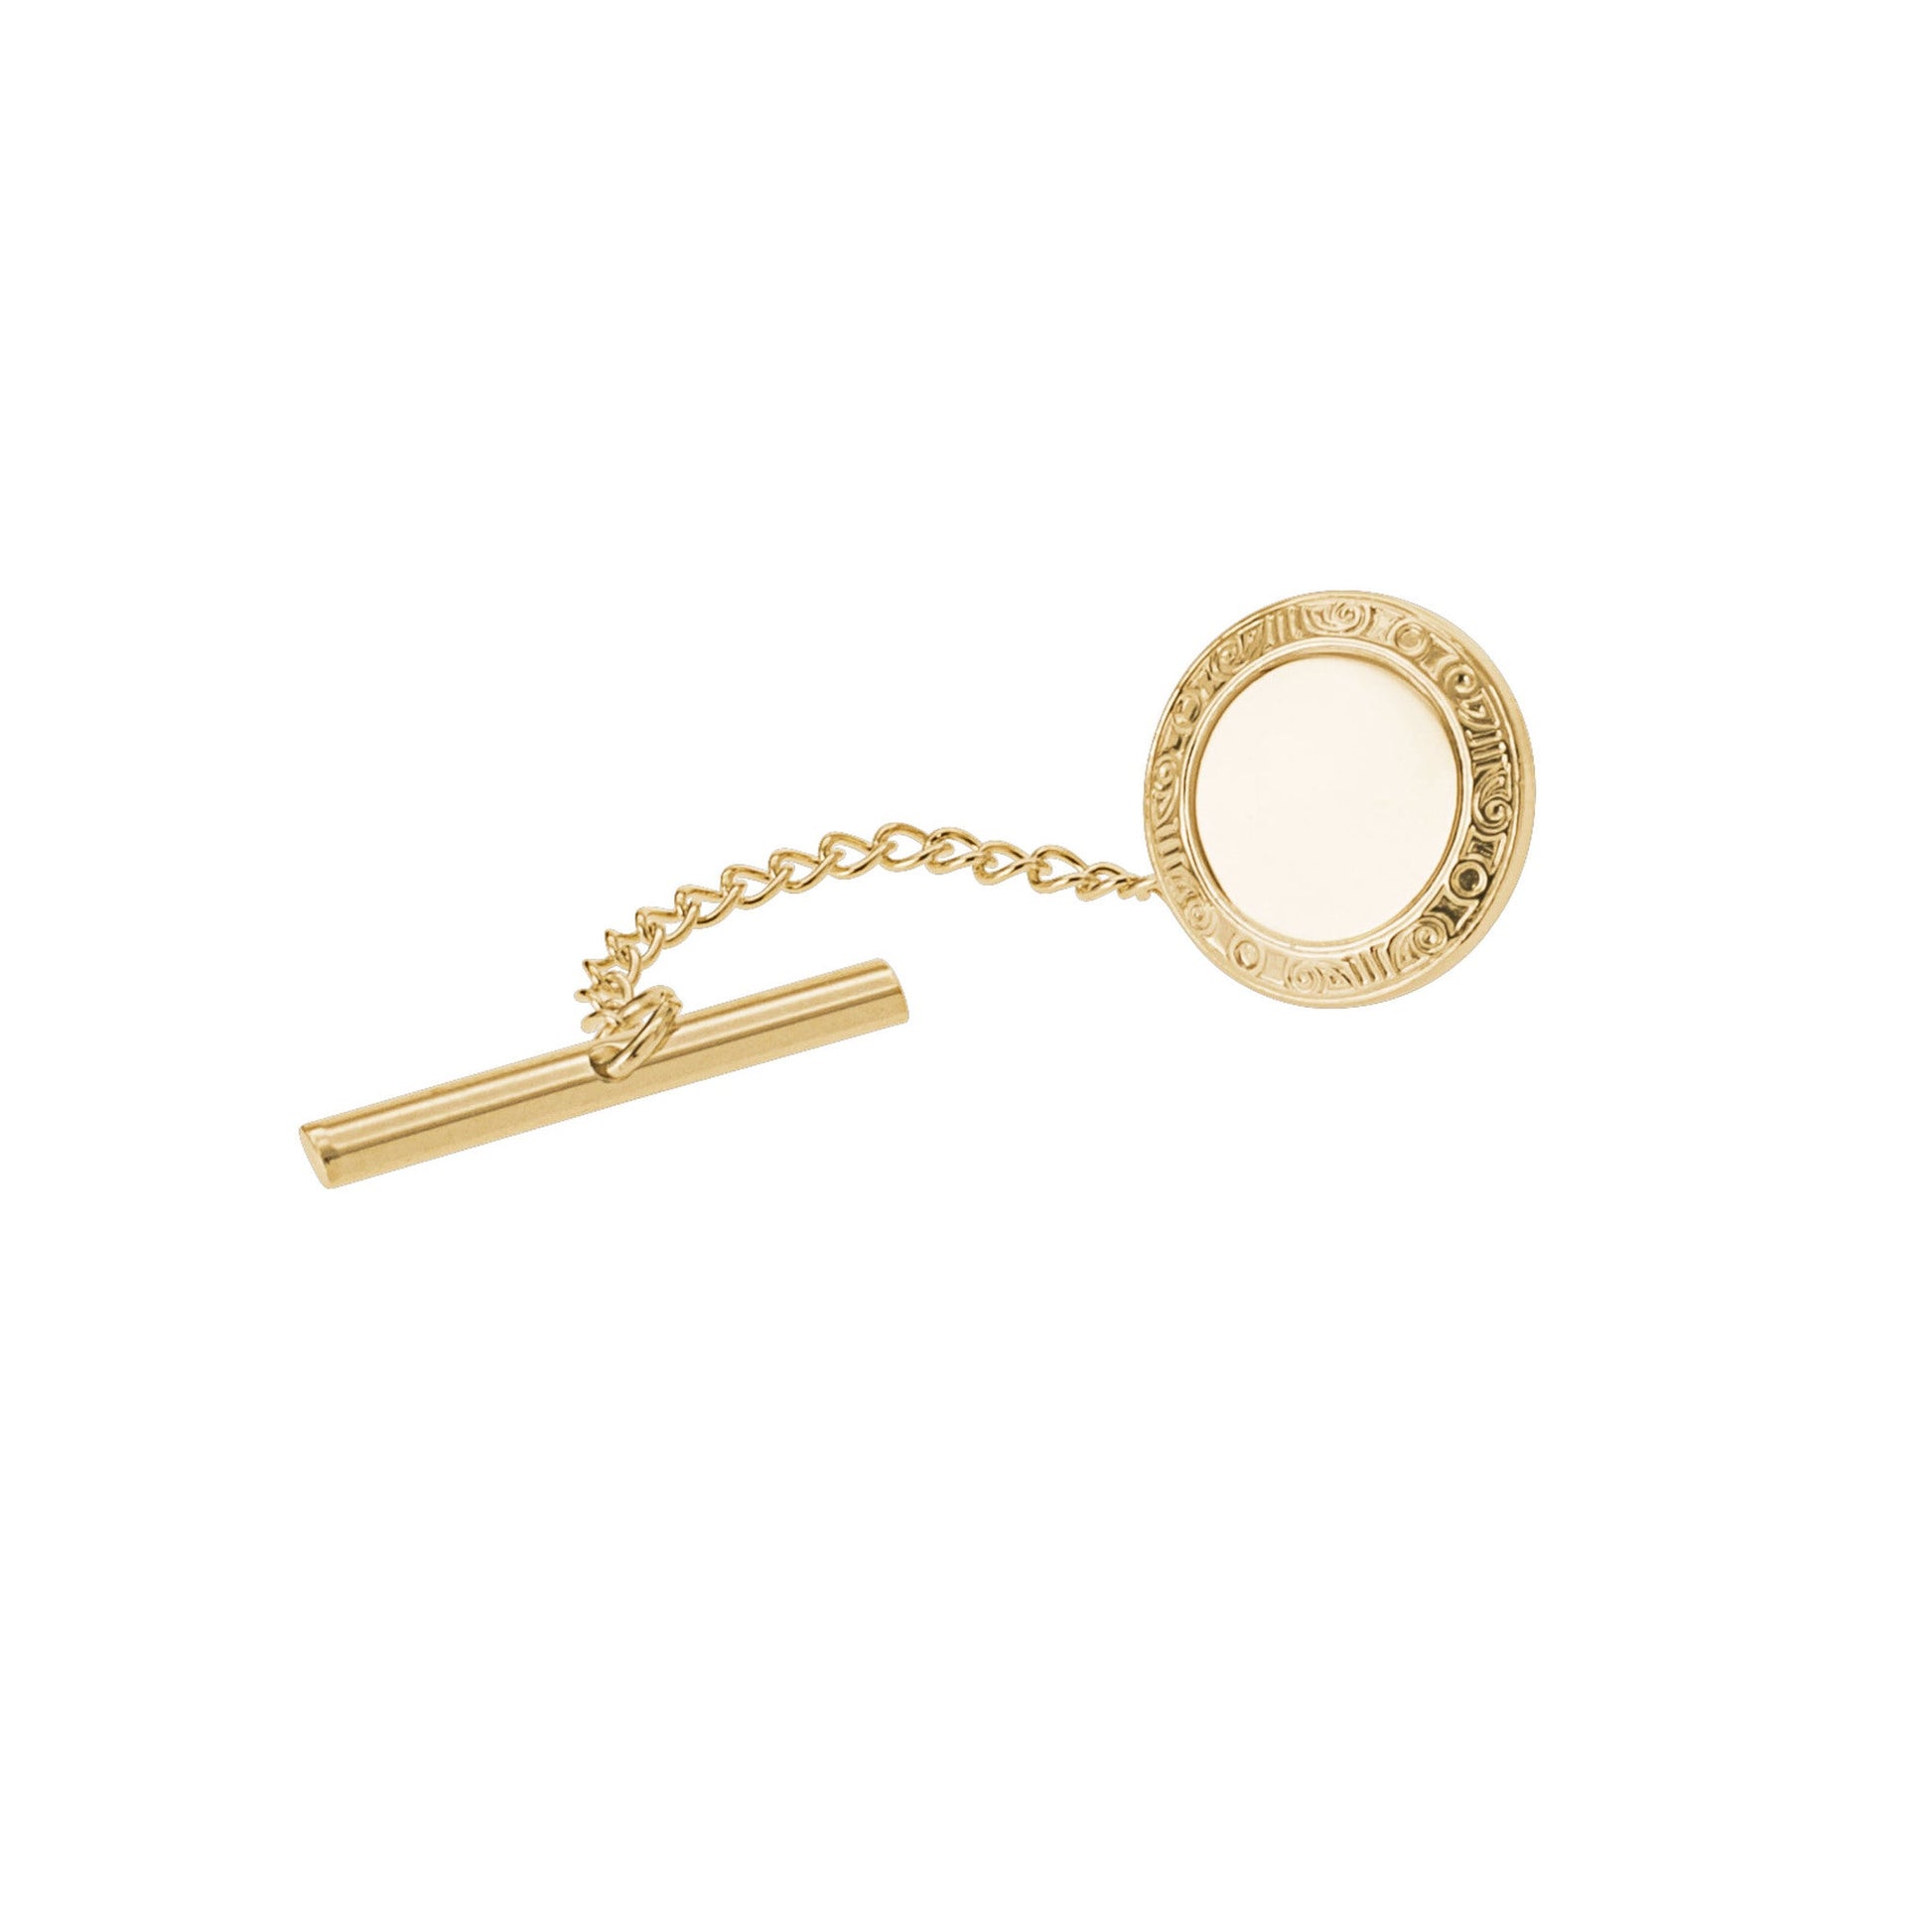 A round tie tack with filigree edge displayed on a neutral white background.